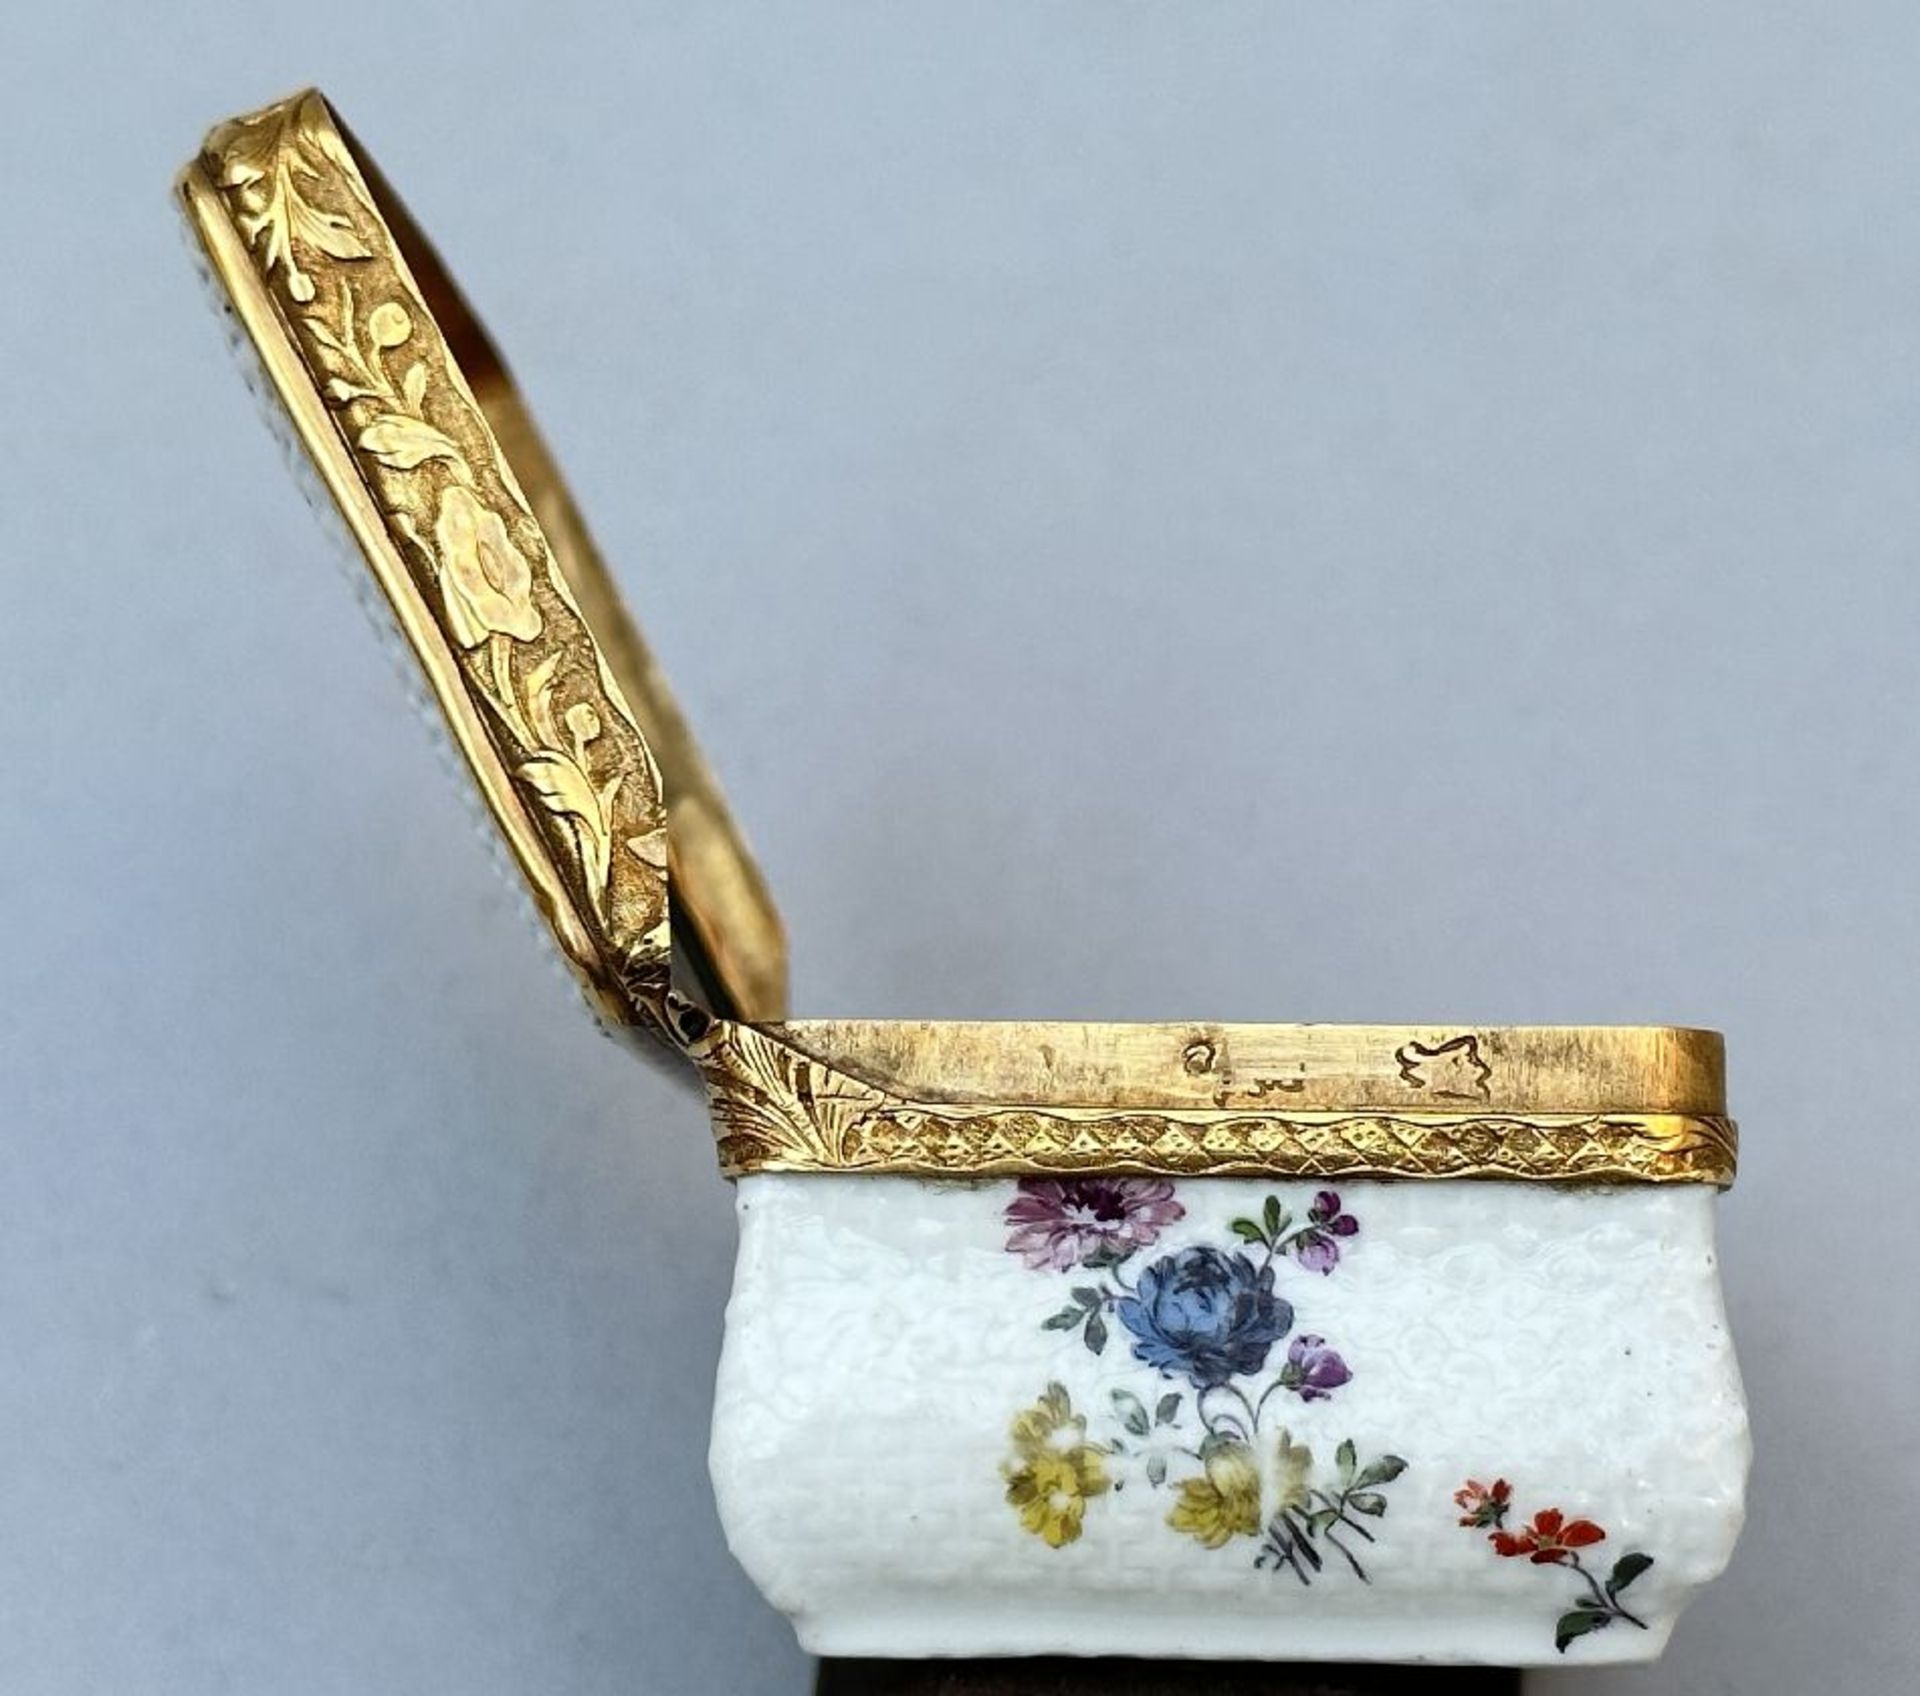 A fine snuff box in Mennecy porcelain with gold mount 'flowers', 18th century - Image 5 of 6